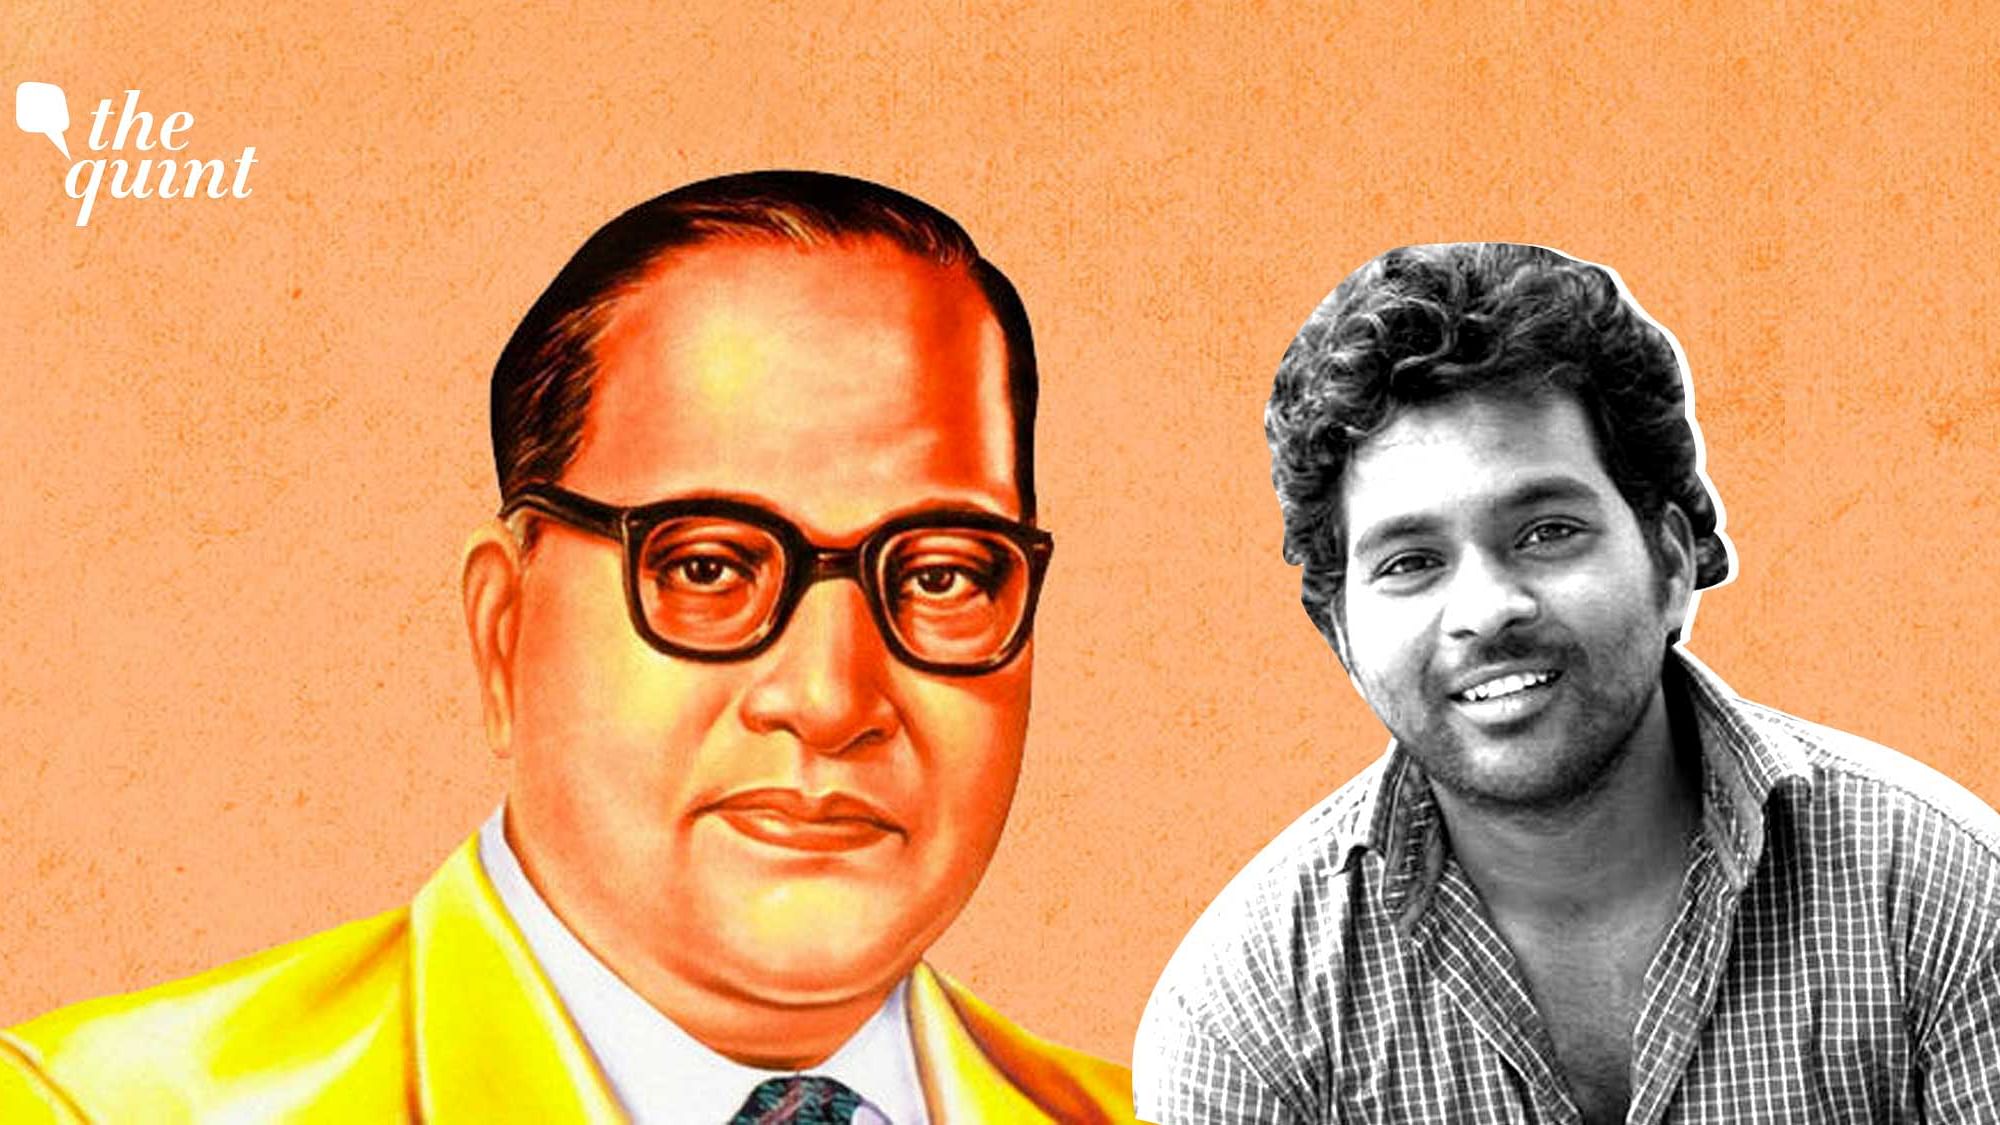 Rohith Vemula’s (R) friend Ramji describes how he has chosen the path of education, first for himself, and then others, to honour their dreams of cementing Dr BR Ambedkar’s (L) legacy.